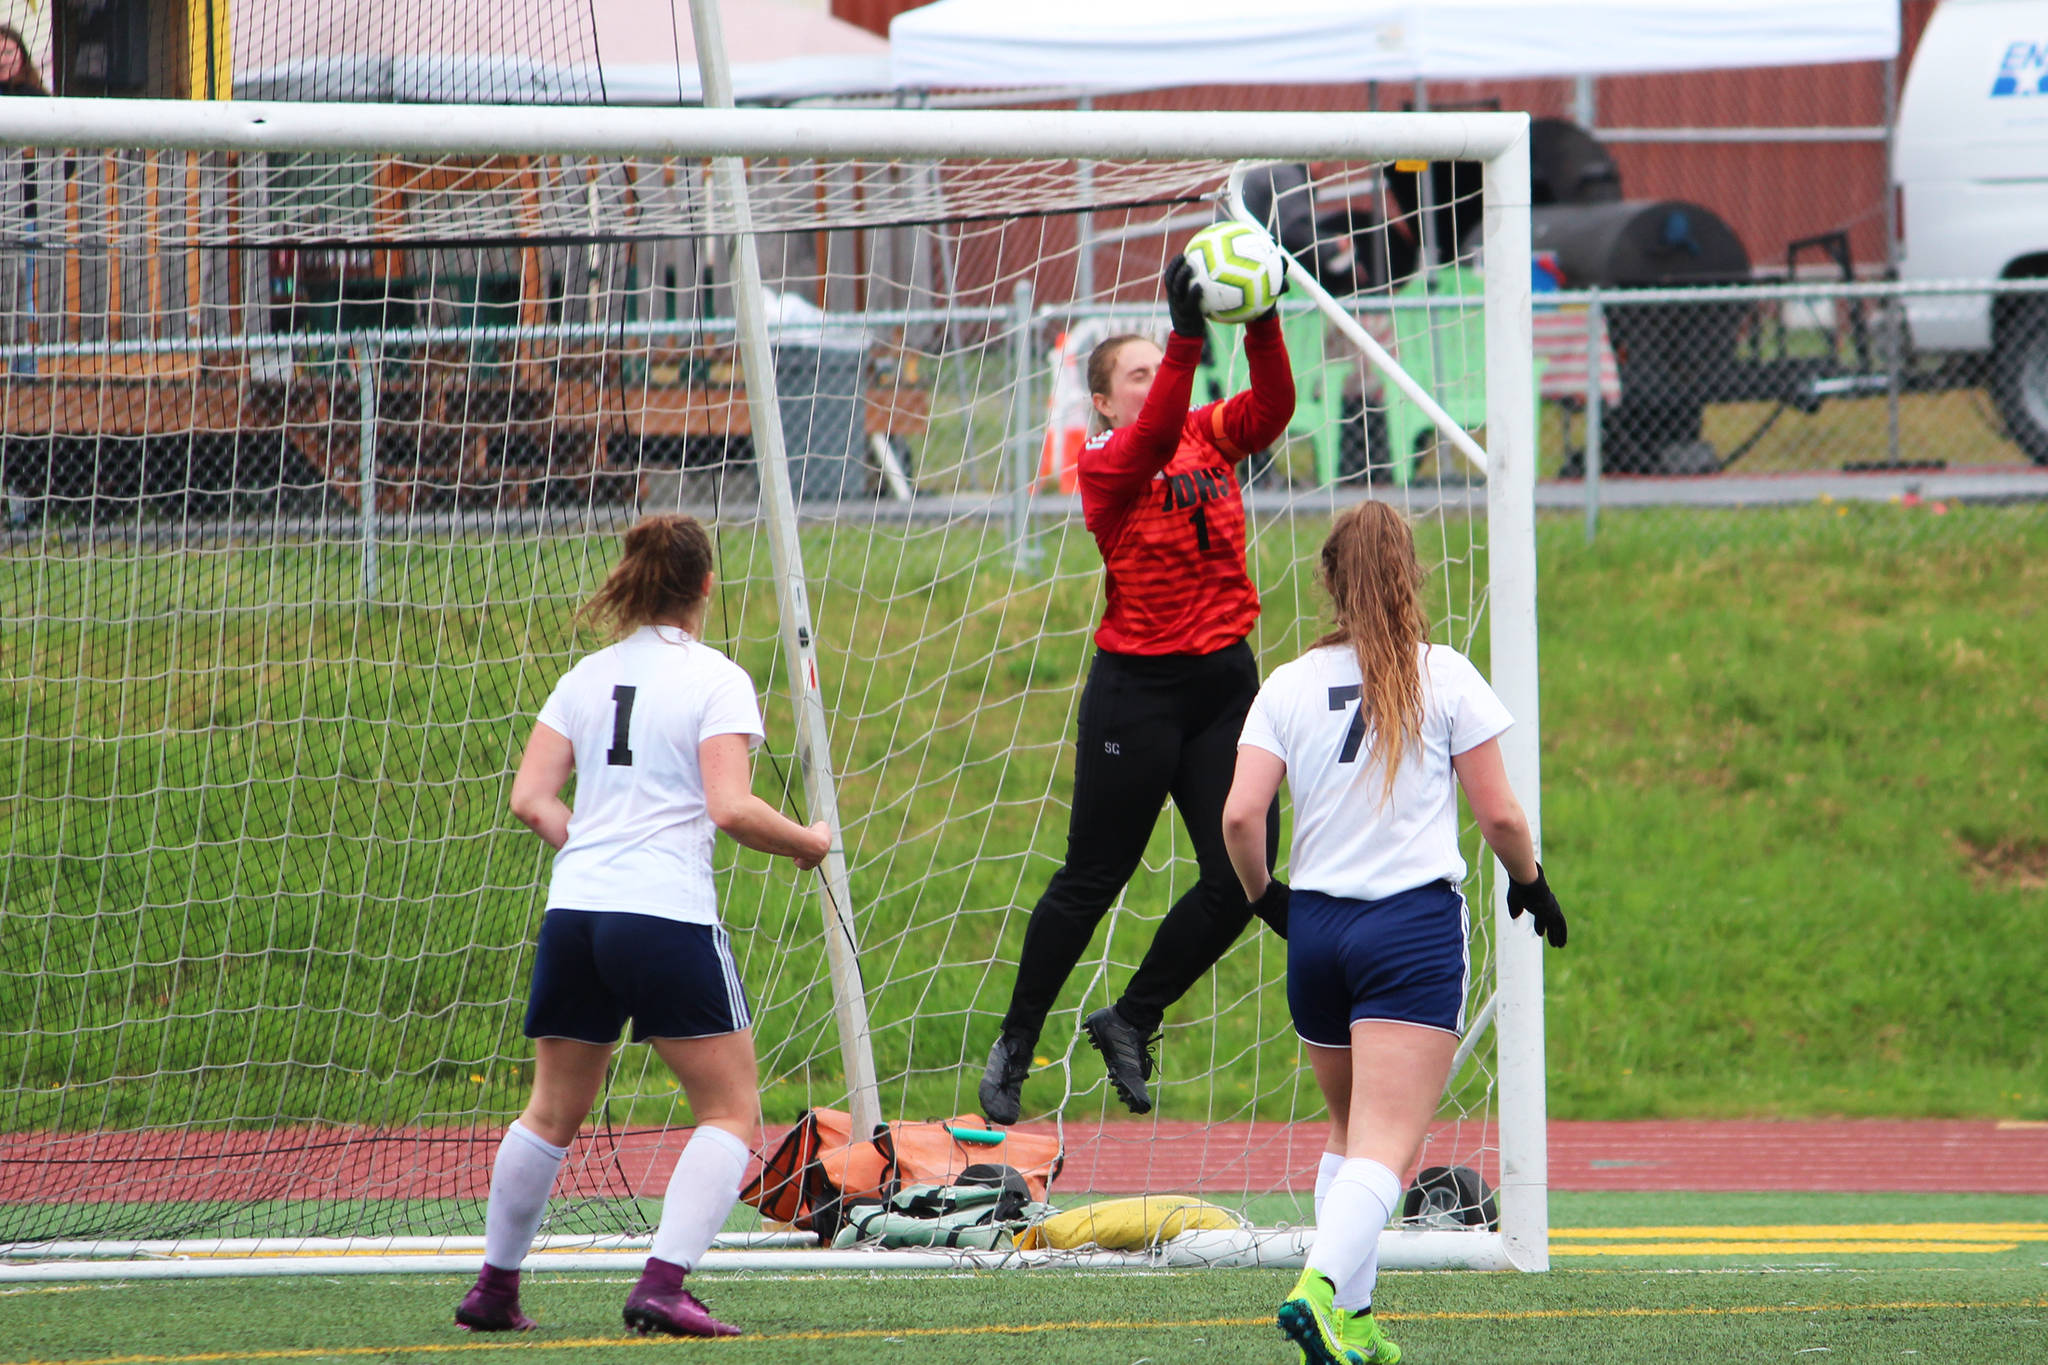 Juneau goalkeeper Shaylin Cesar grabs a ball out of the air on a shot from Soldotna’s team during the final game of the Division II state soccer championships Saturday, May 25, 2019 at Service High School in Anchorage, Alaska. (Photo by Megan Pacer/Homer News)